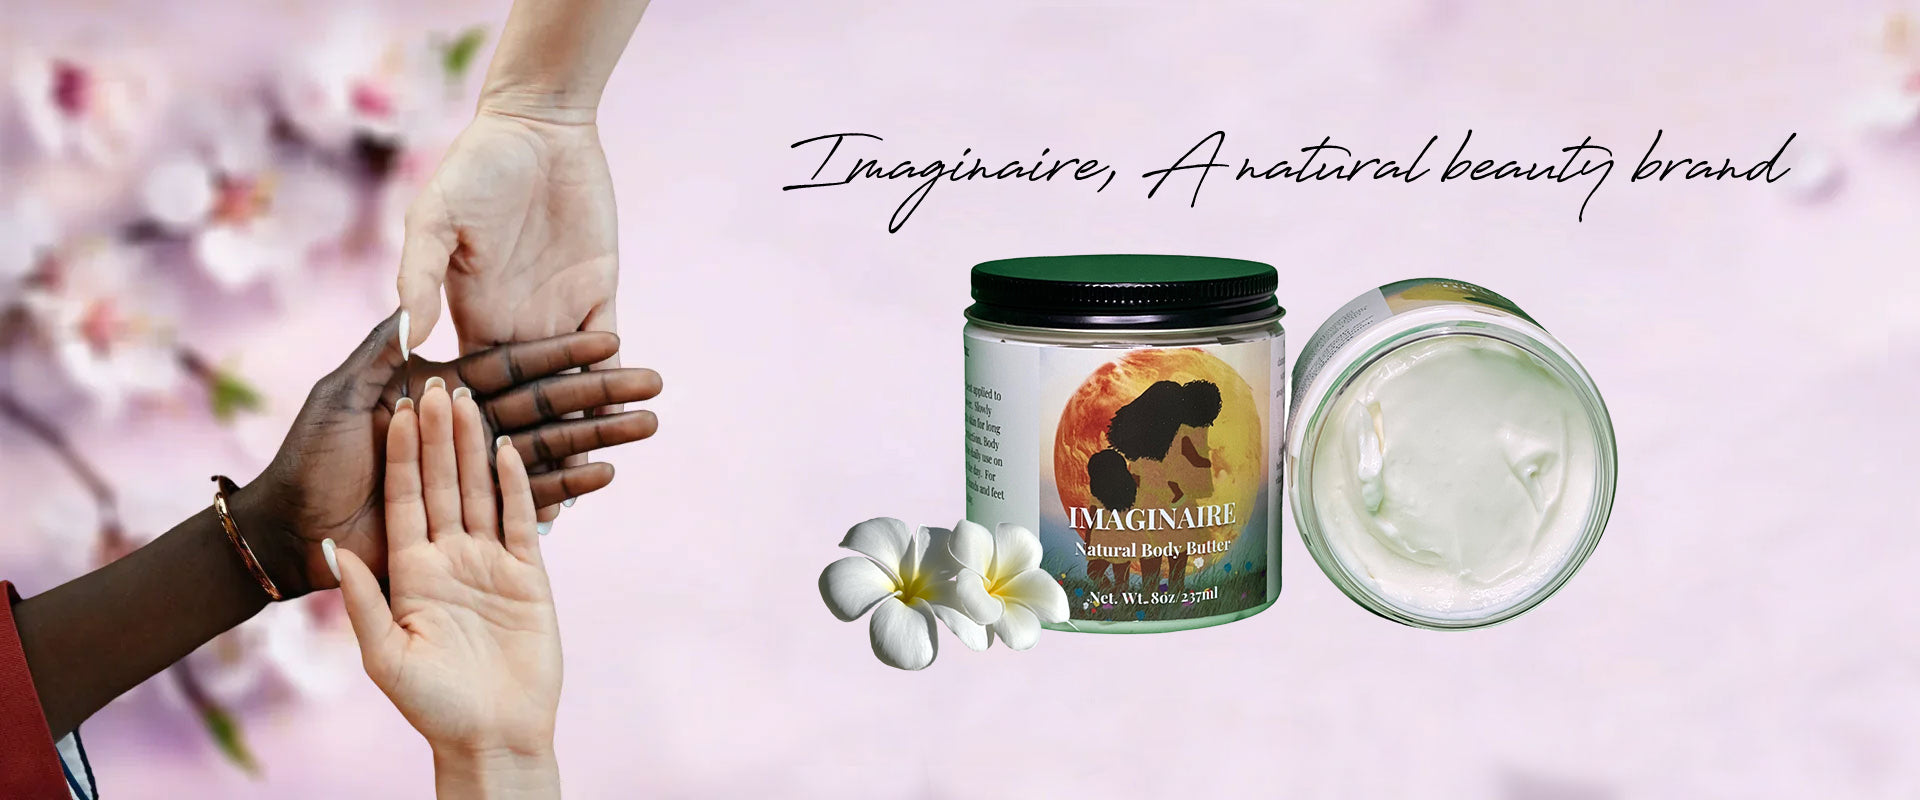 Imaginaire, A natural beauty brand